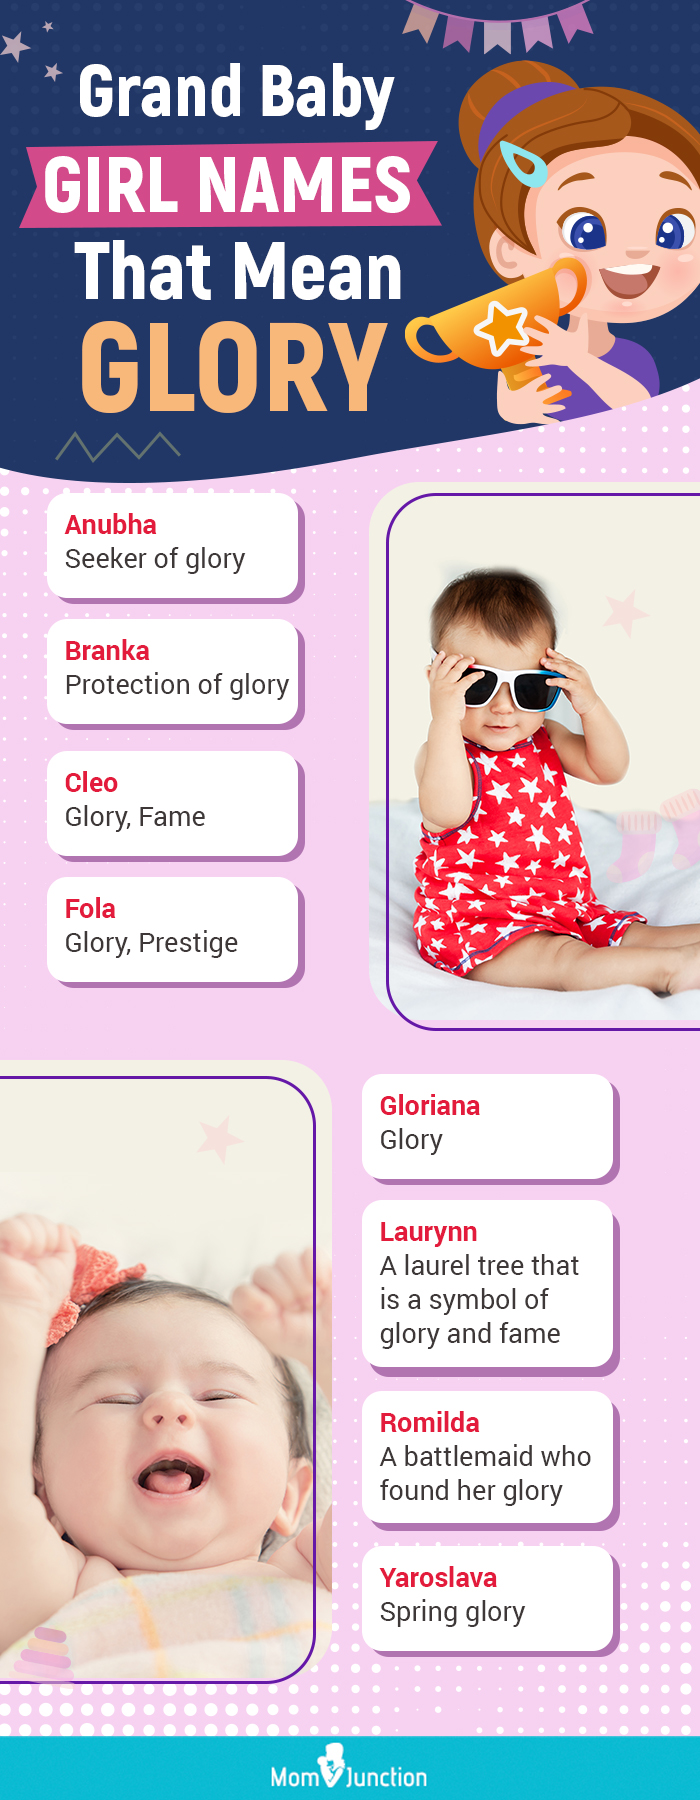 grand baby girl names that mean glory (infographic)